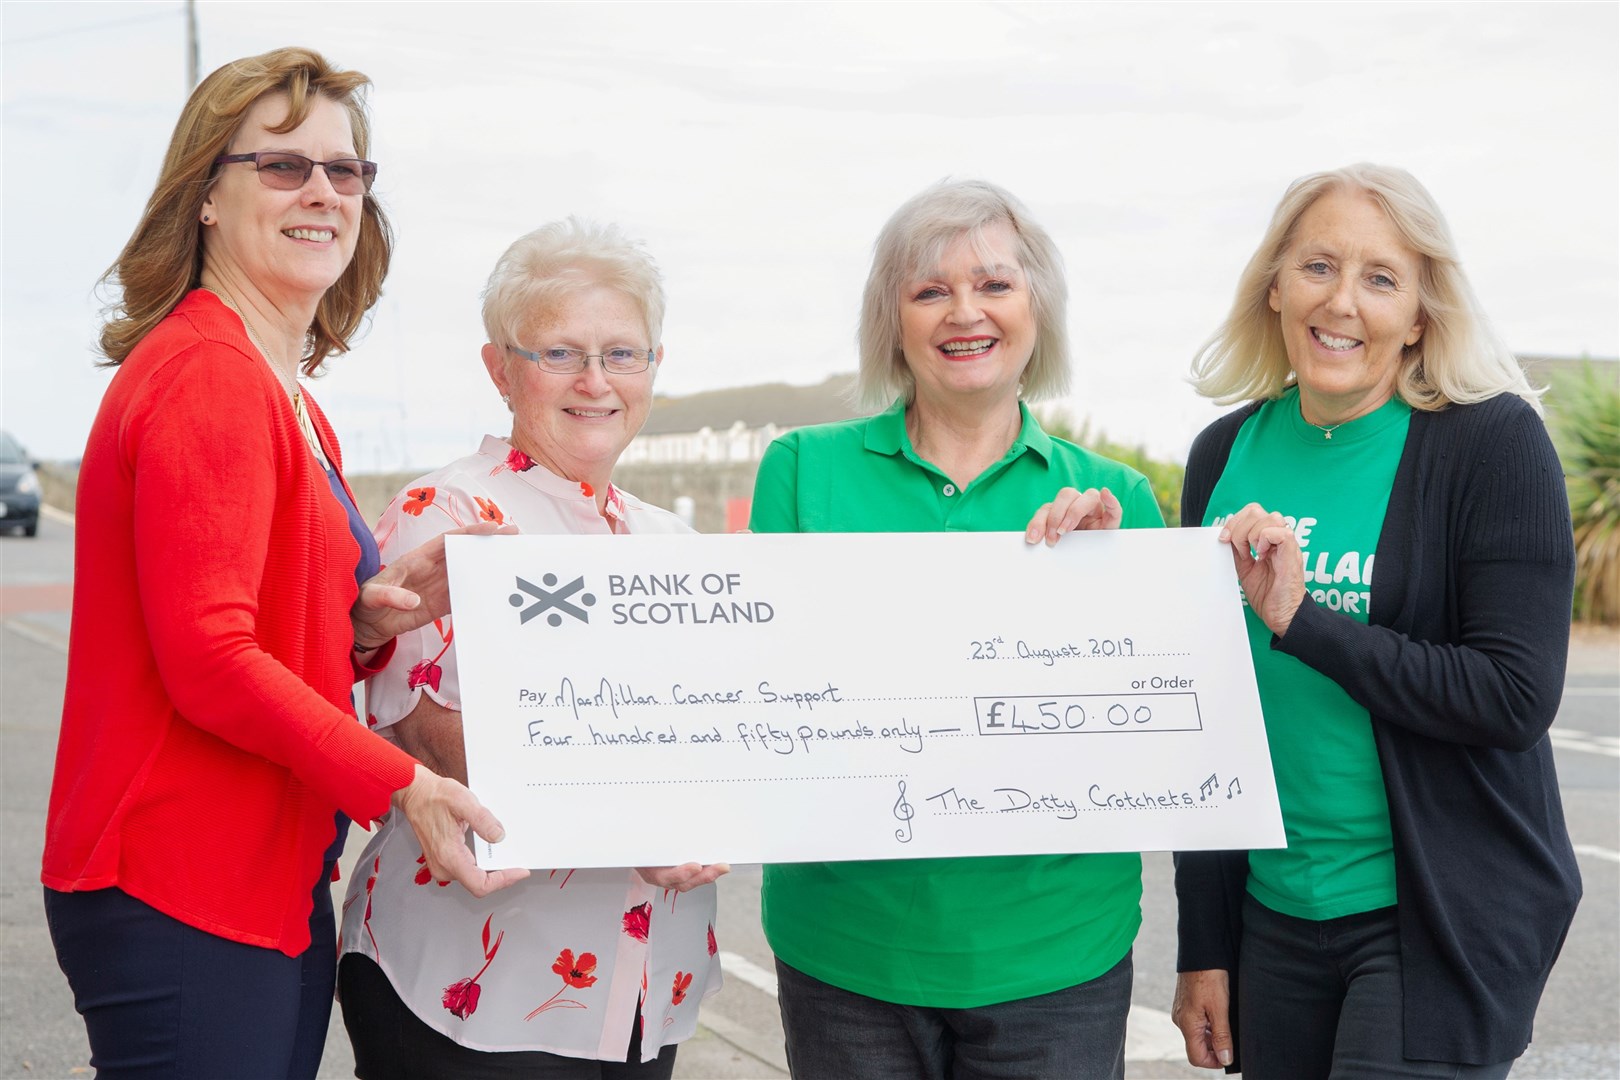 Presenting £450 to Macmillan Cancer Support are Dotty Crotchets (from left) Maureen Halkett, Helen McKellar, Patricia Anderson and Liz Major. Picture: Daniel Forsyth. Image No.044600.